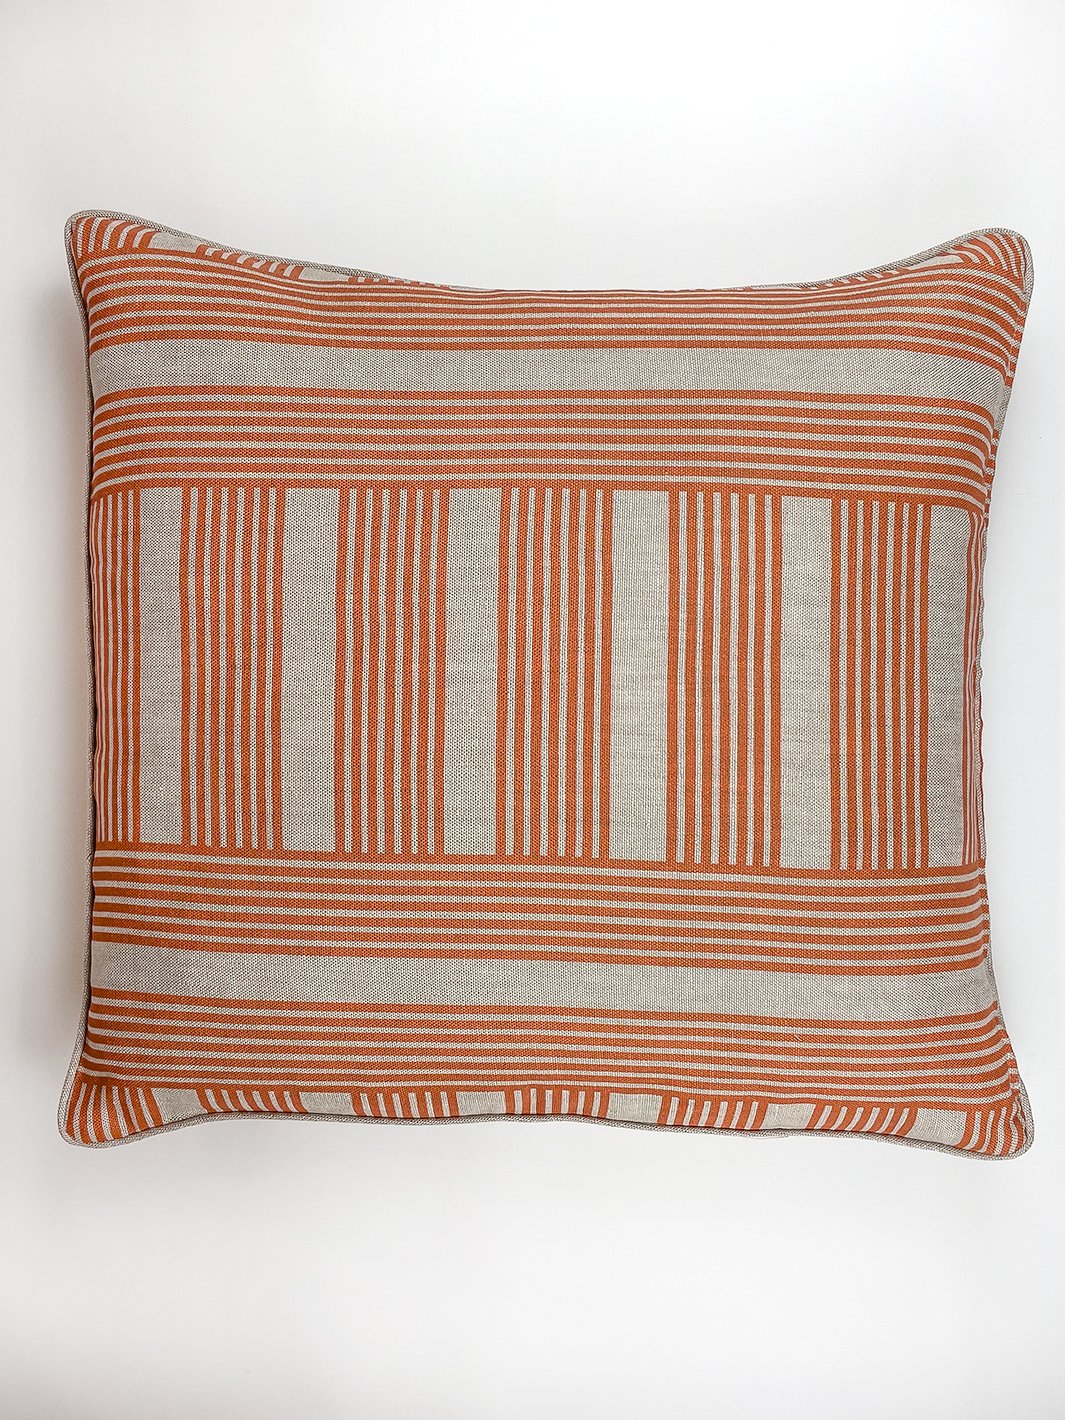 'Roman Holiday Grid' Throw Pillow by Barbie™ - Terracotta